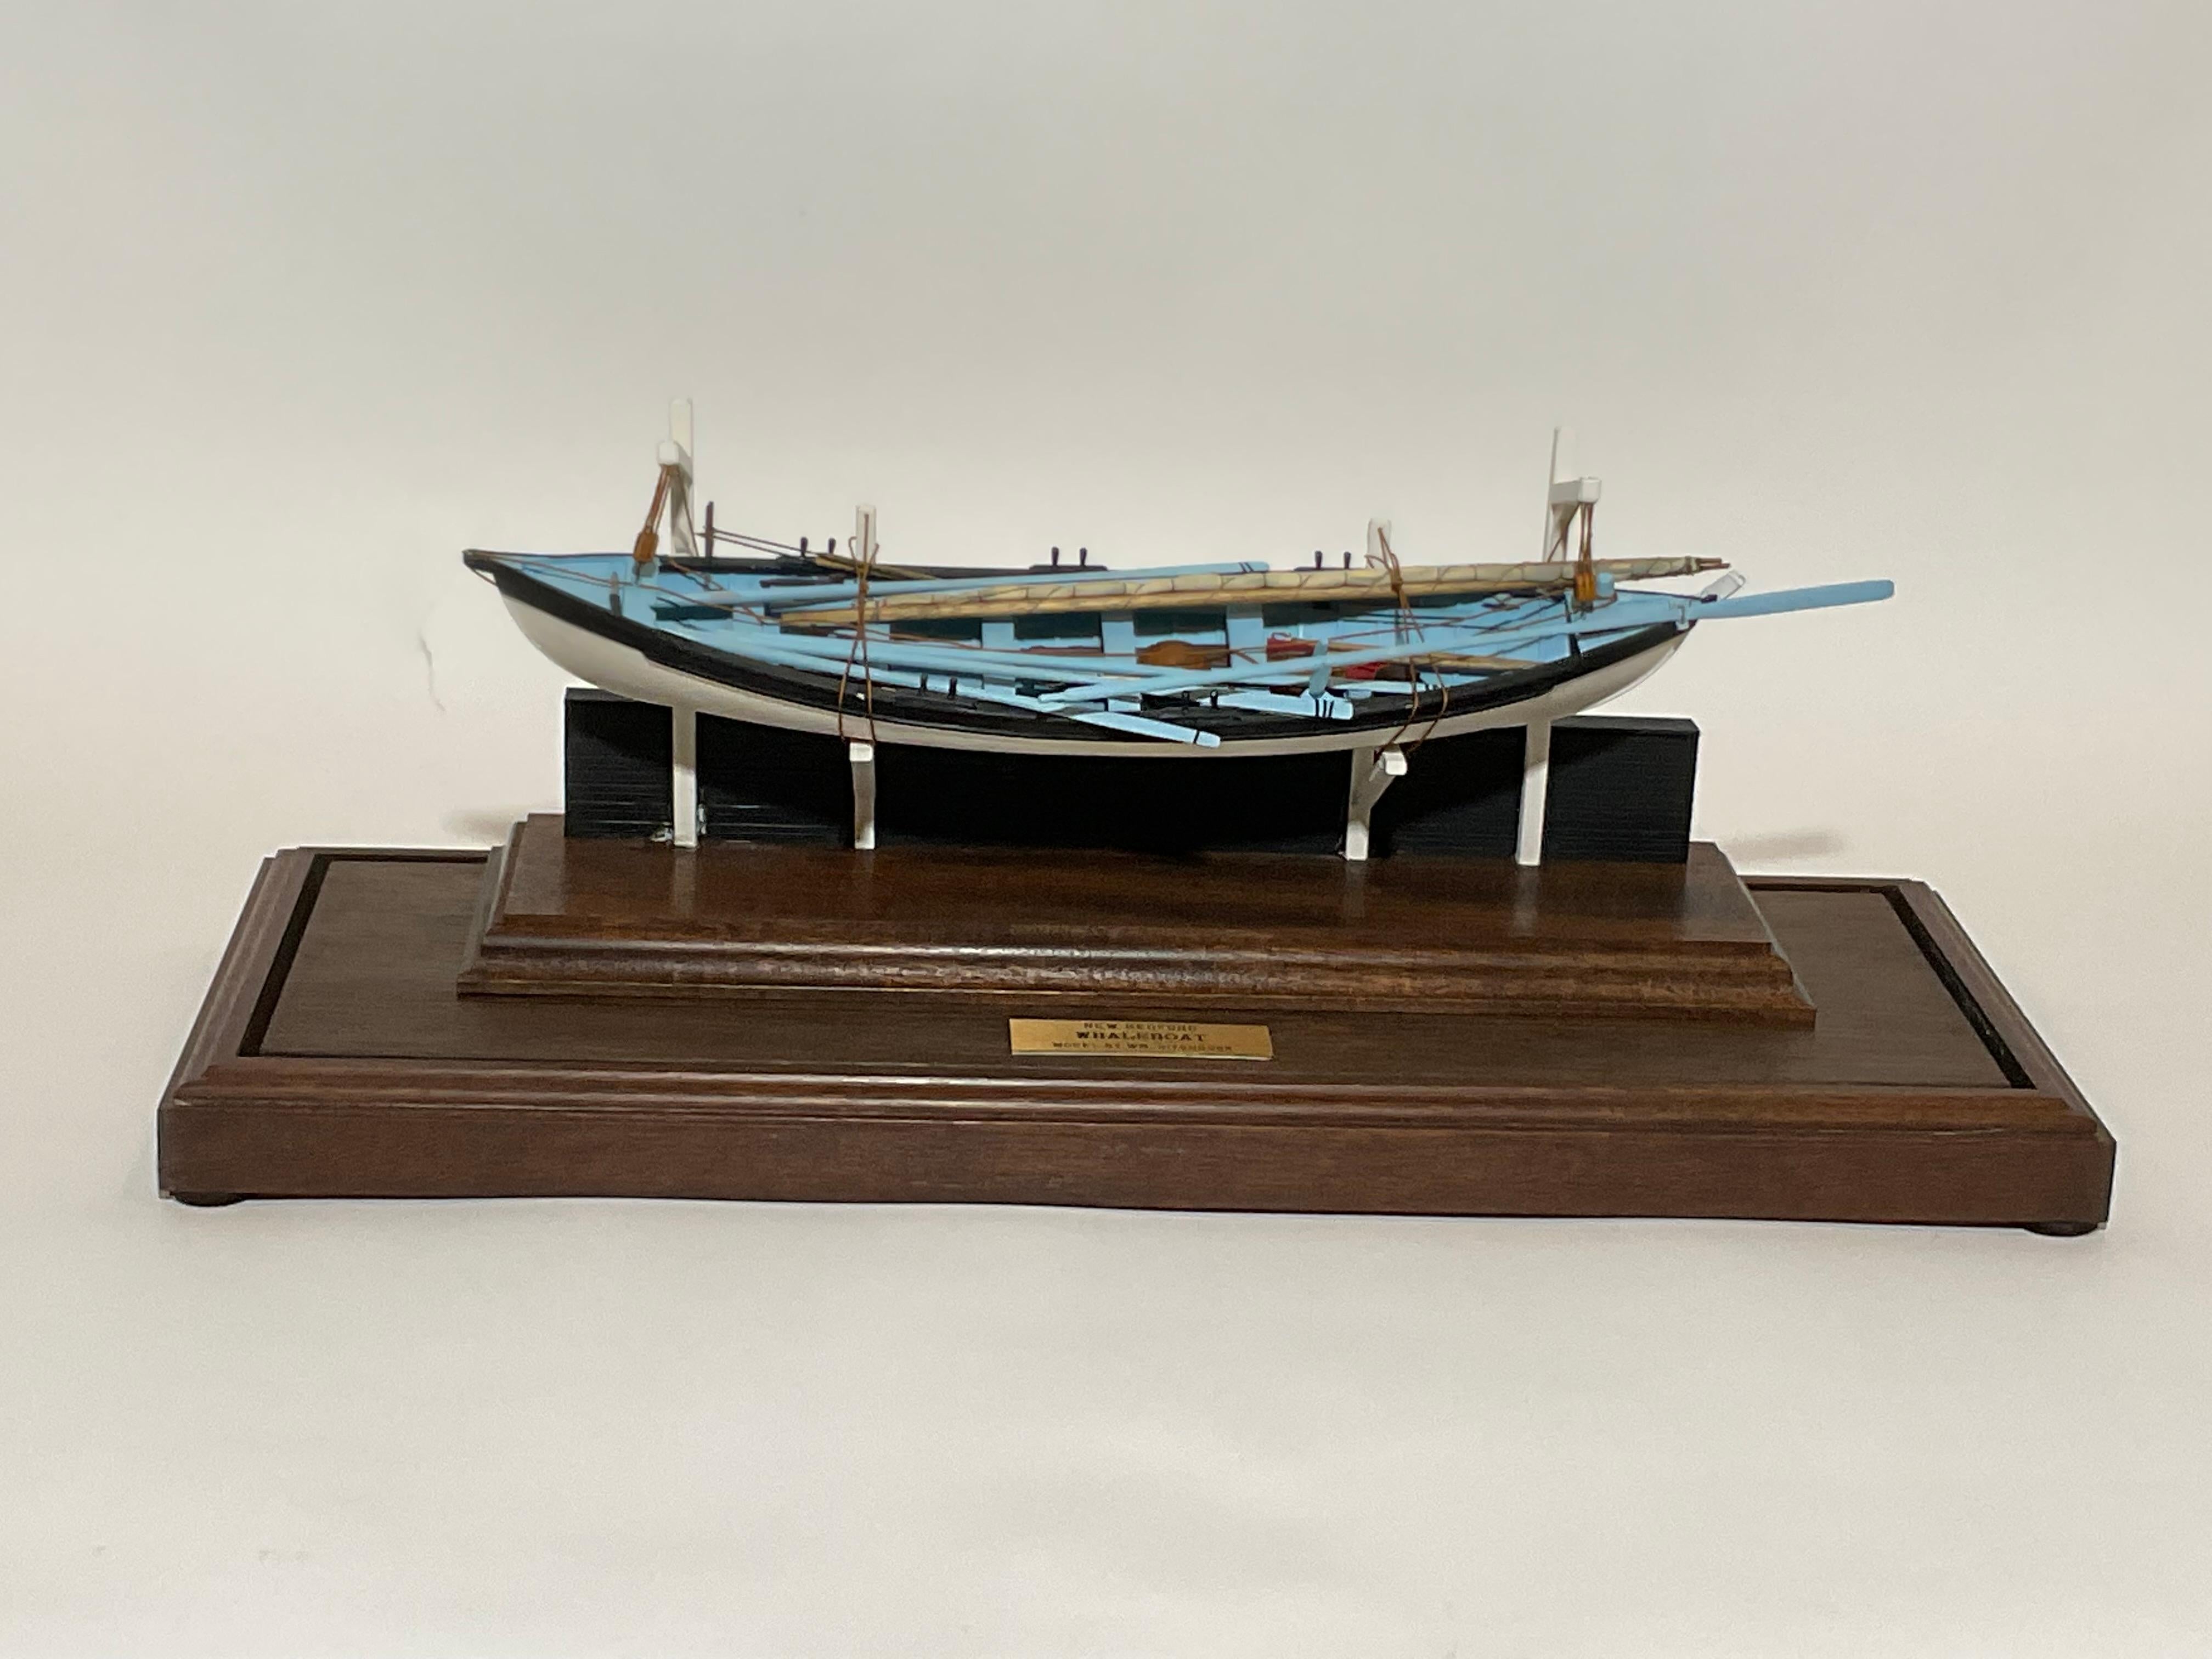 Whaleboat Model by William Hitchcock In Excellent Condition For Sale In Norwell, MA